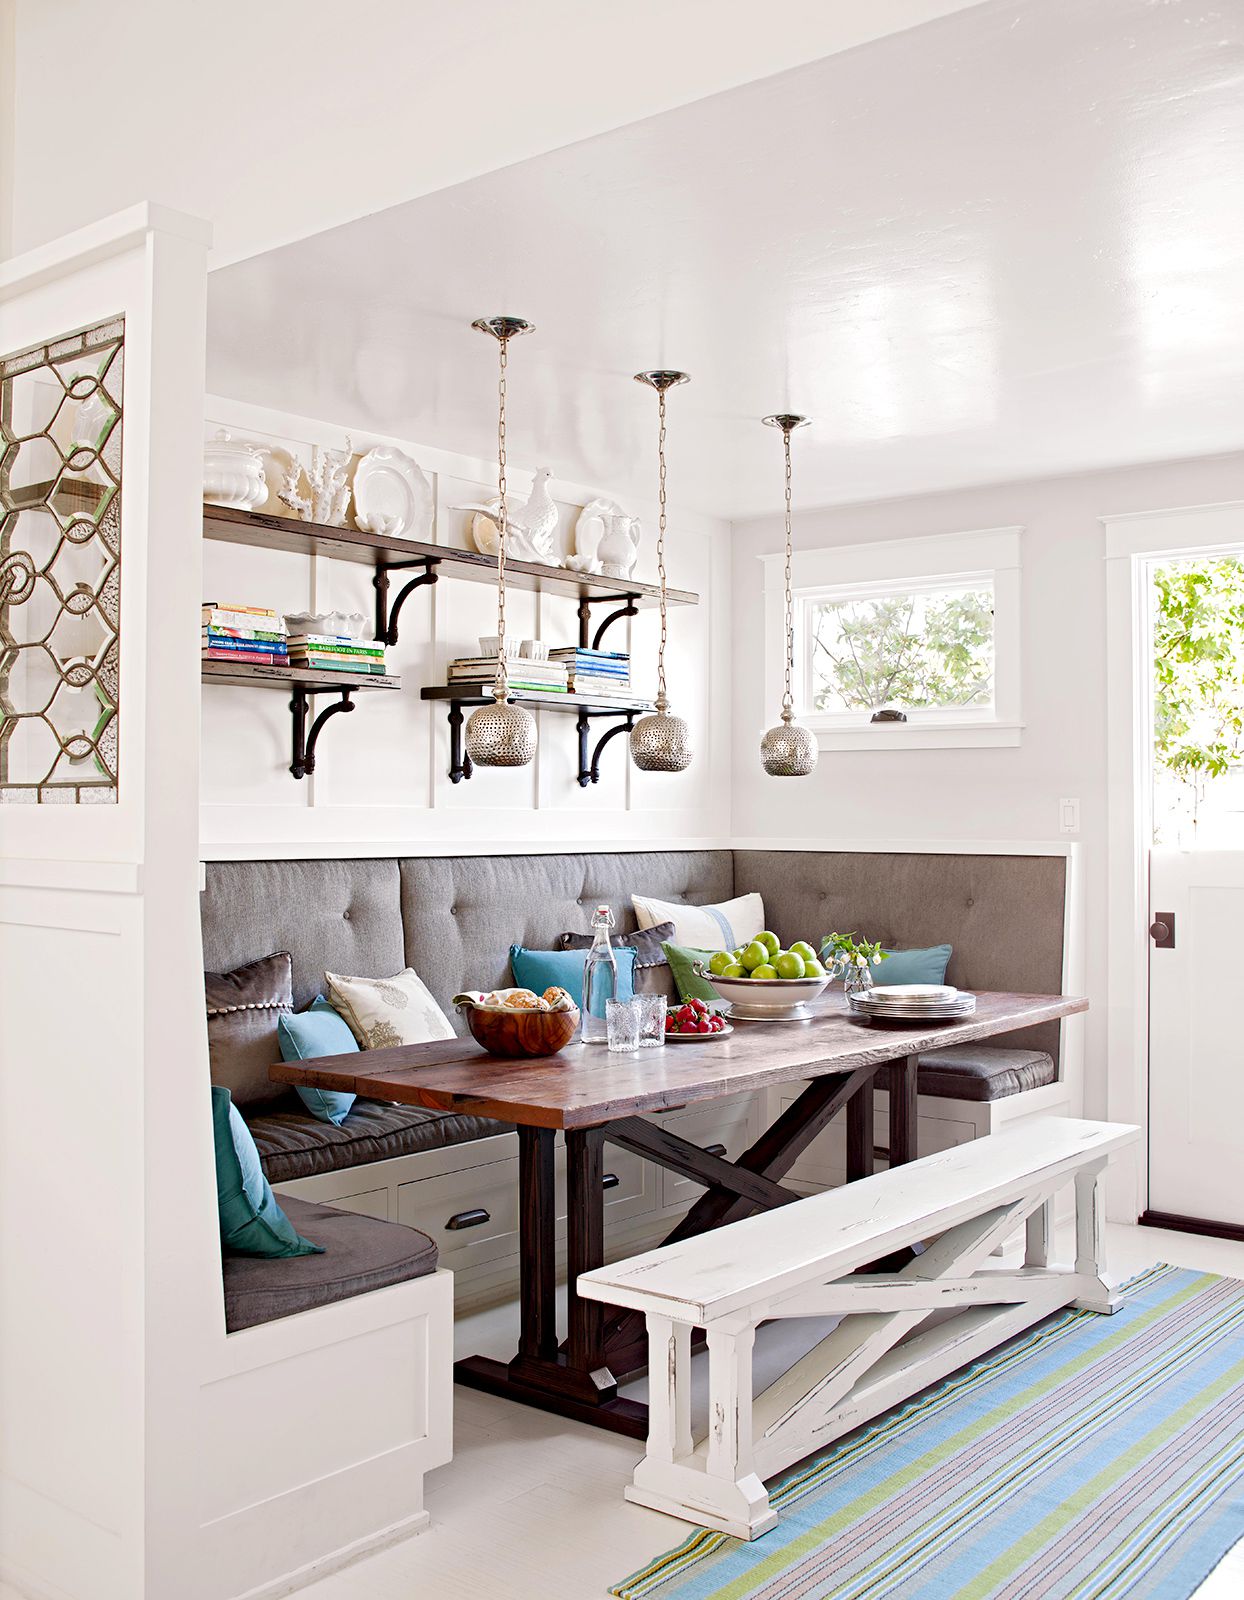 Built In Seating with Storage Unlocking the Magic of Kitchen Space-Saving Ideas - 6 Kitchen Space-Saving Ideas